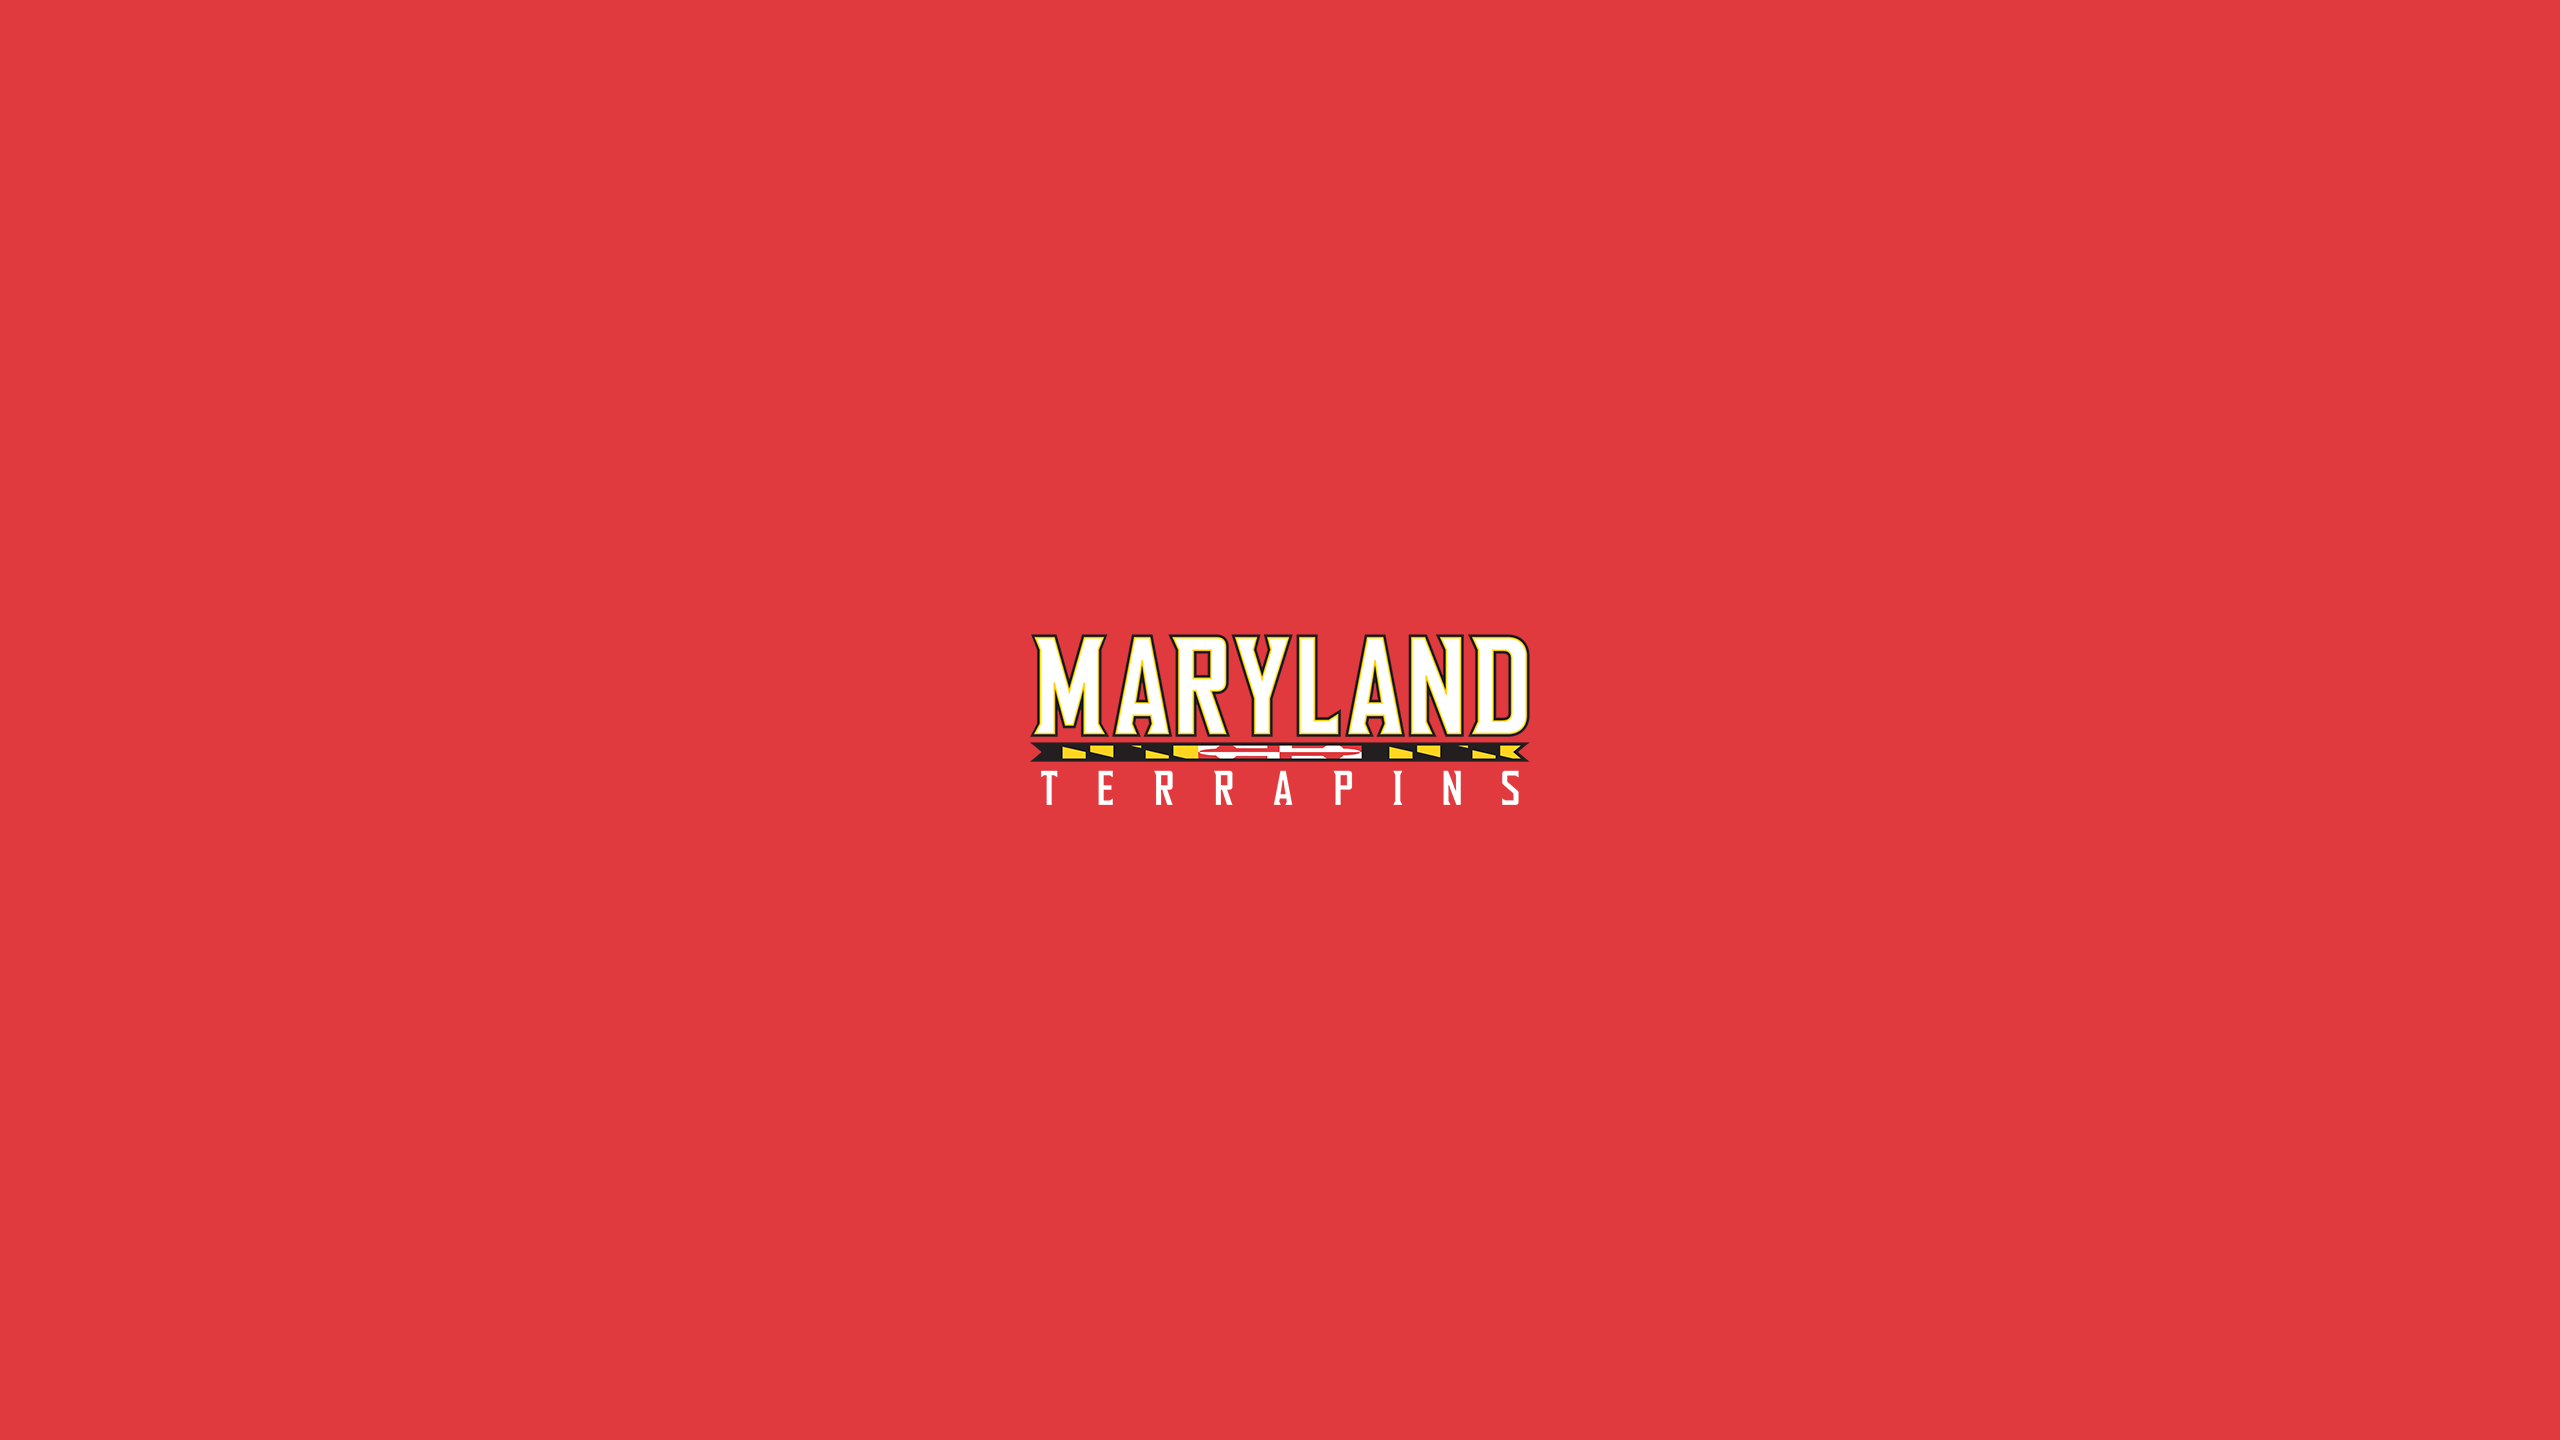 Maryland Terrapins Basketball - NCAAB - Square Bettor